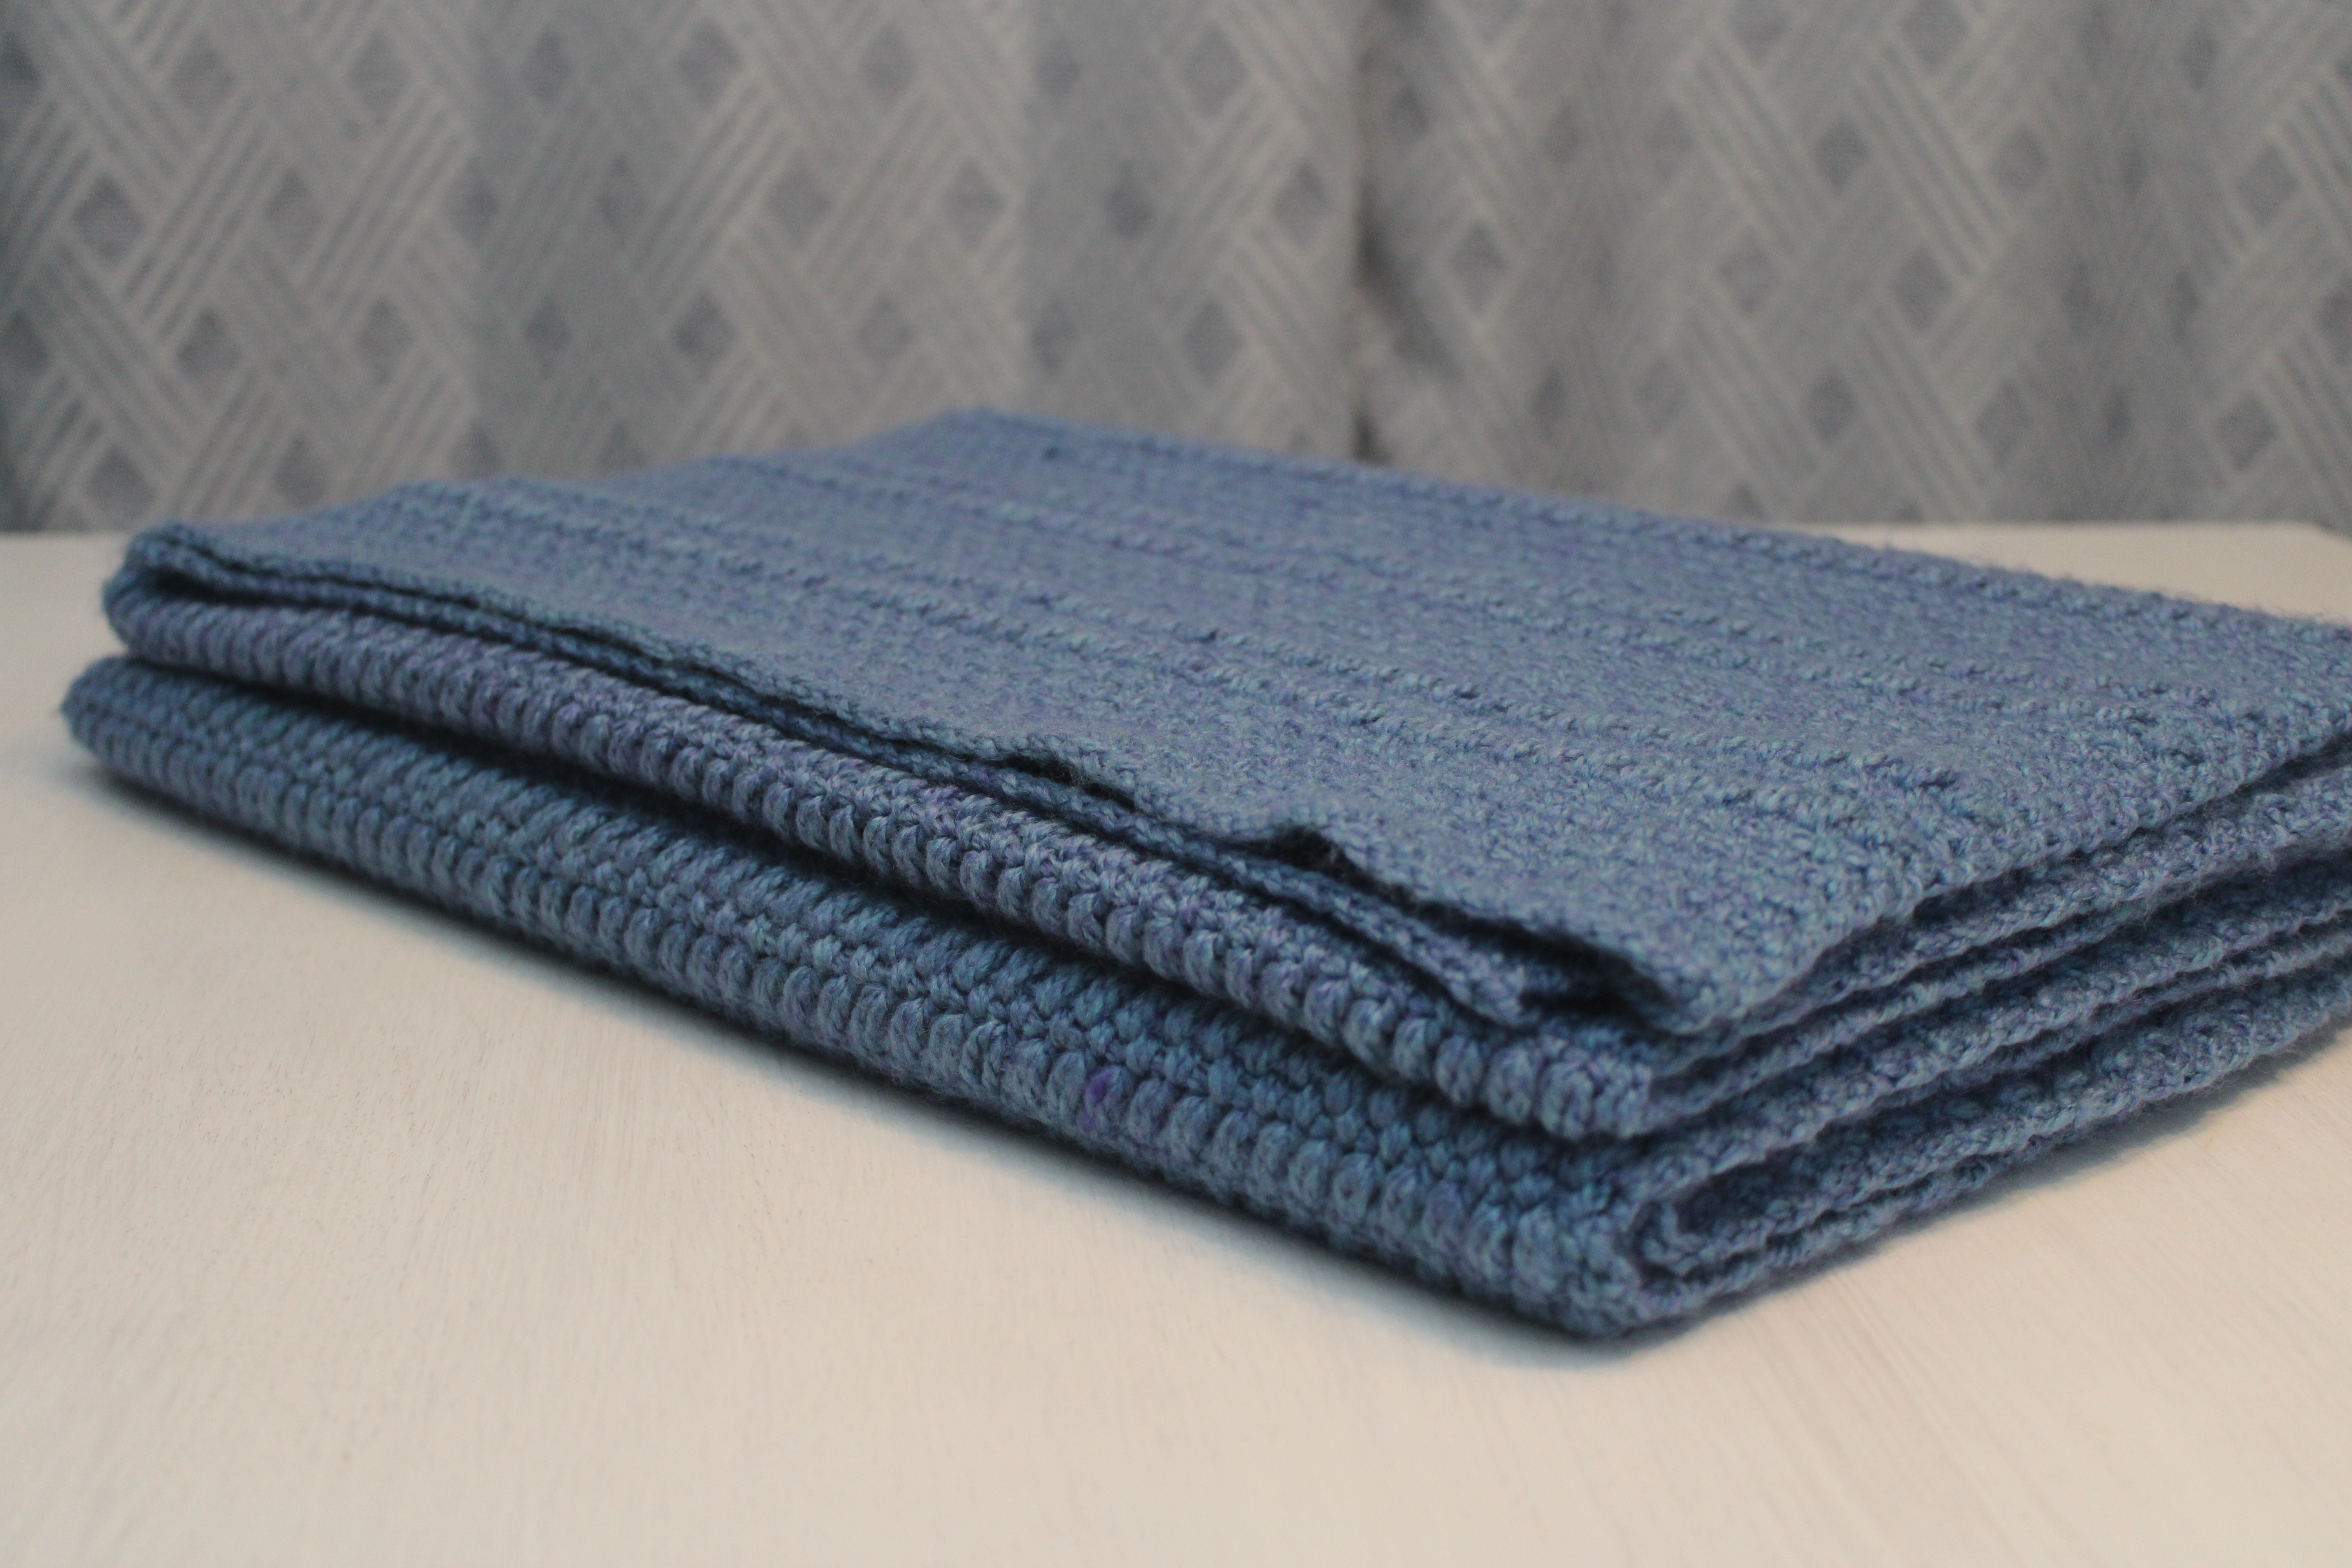 blue crocheted moss and puff stitch bed scarf folded on a dresser